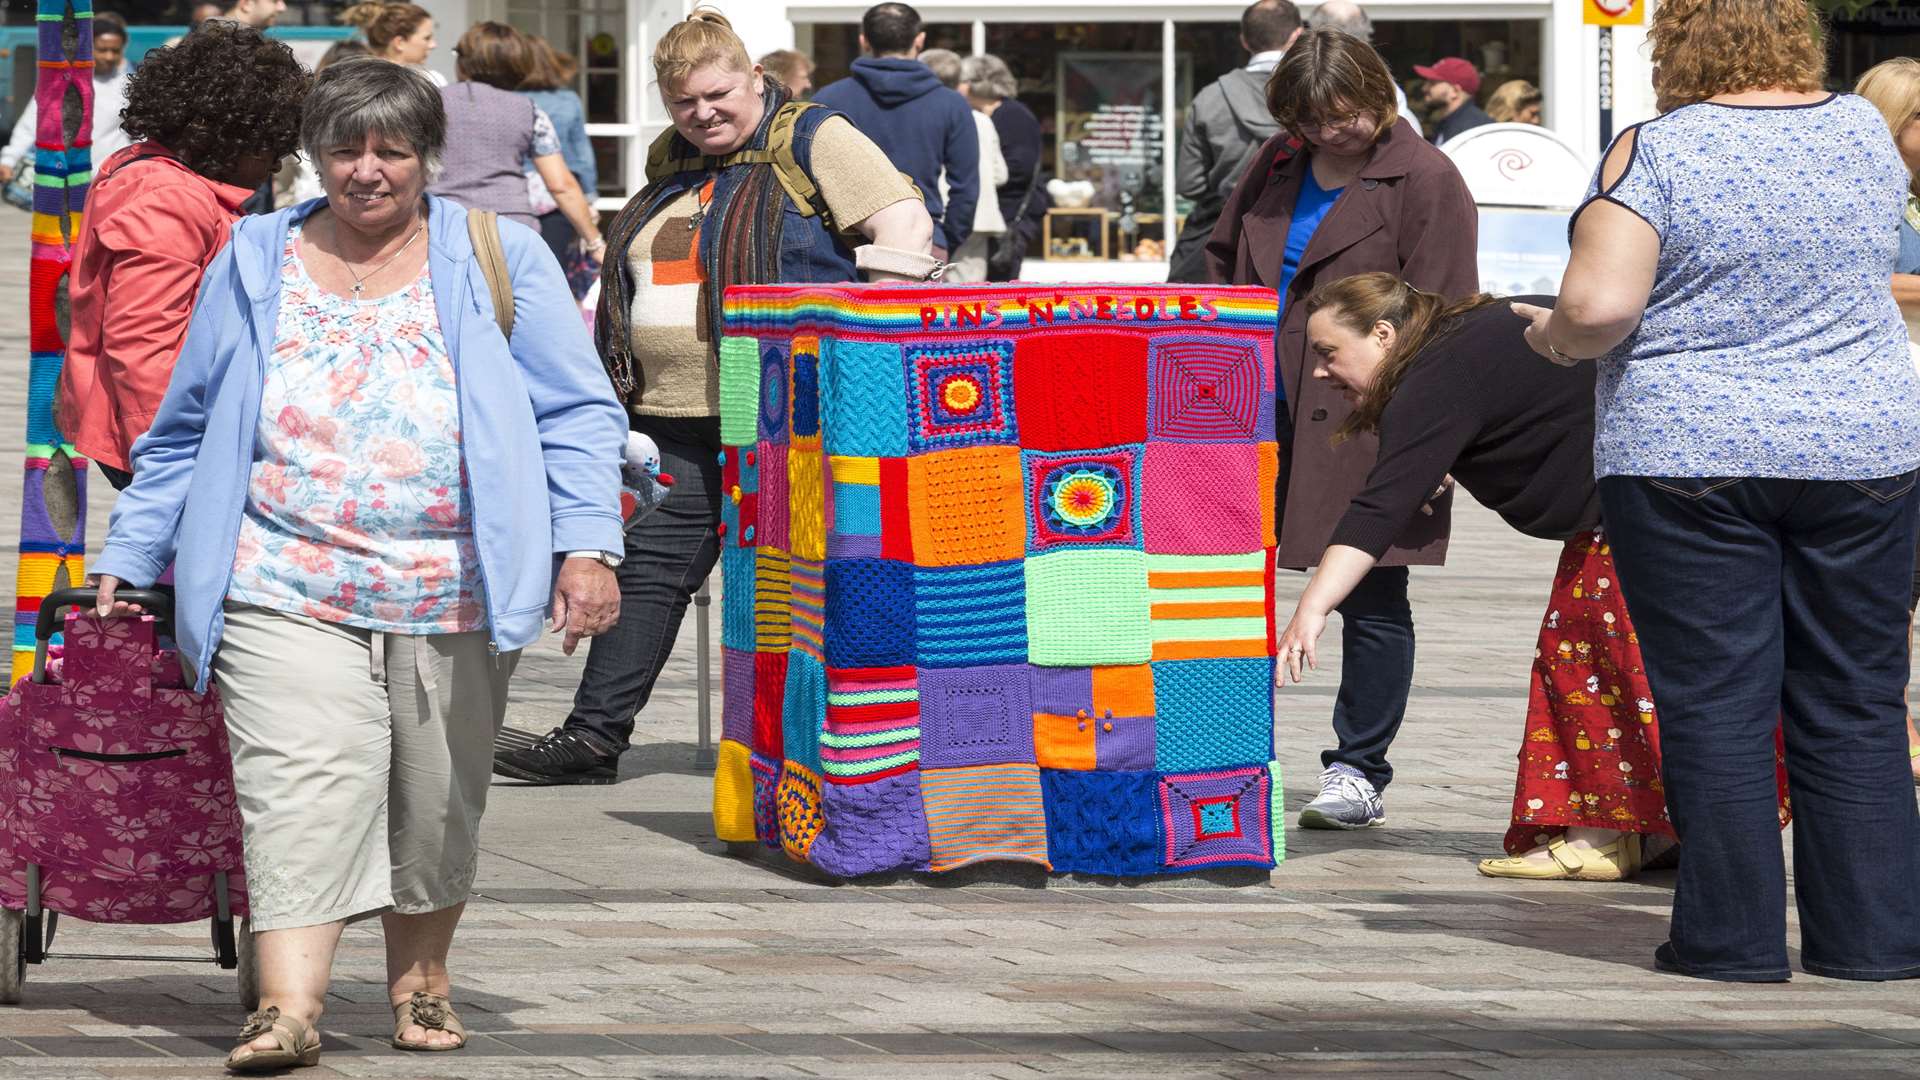 Yarn bombers will be taking people by surprise in Maidstone this Saturday